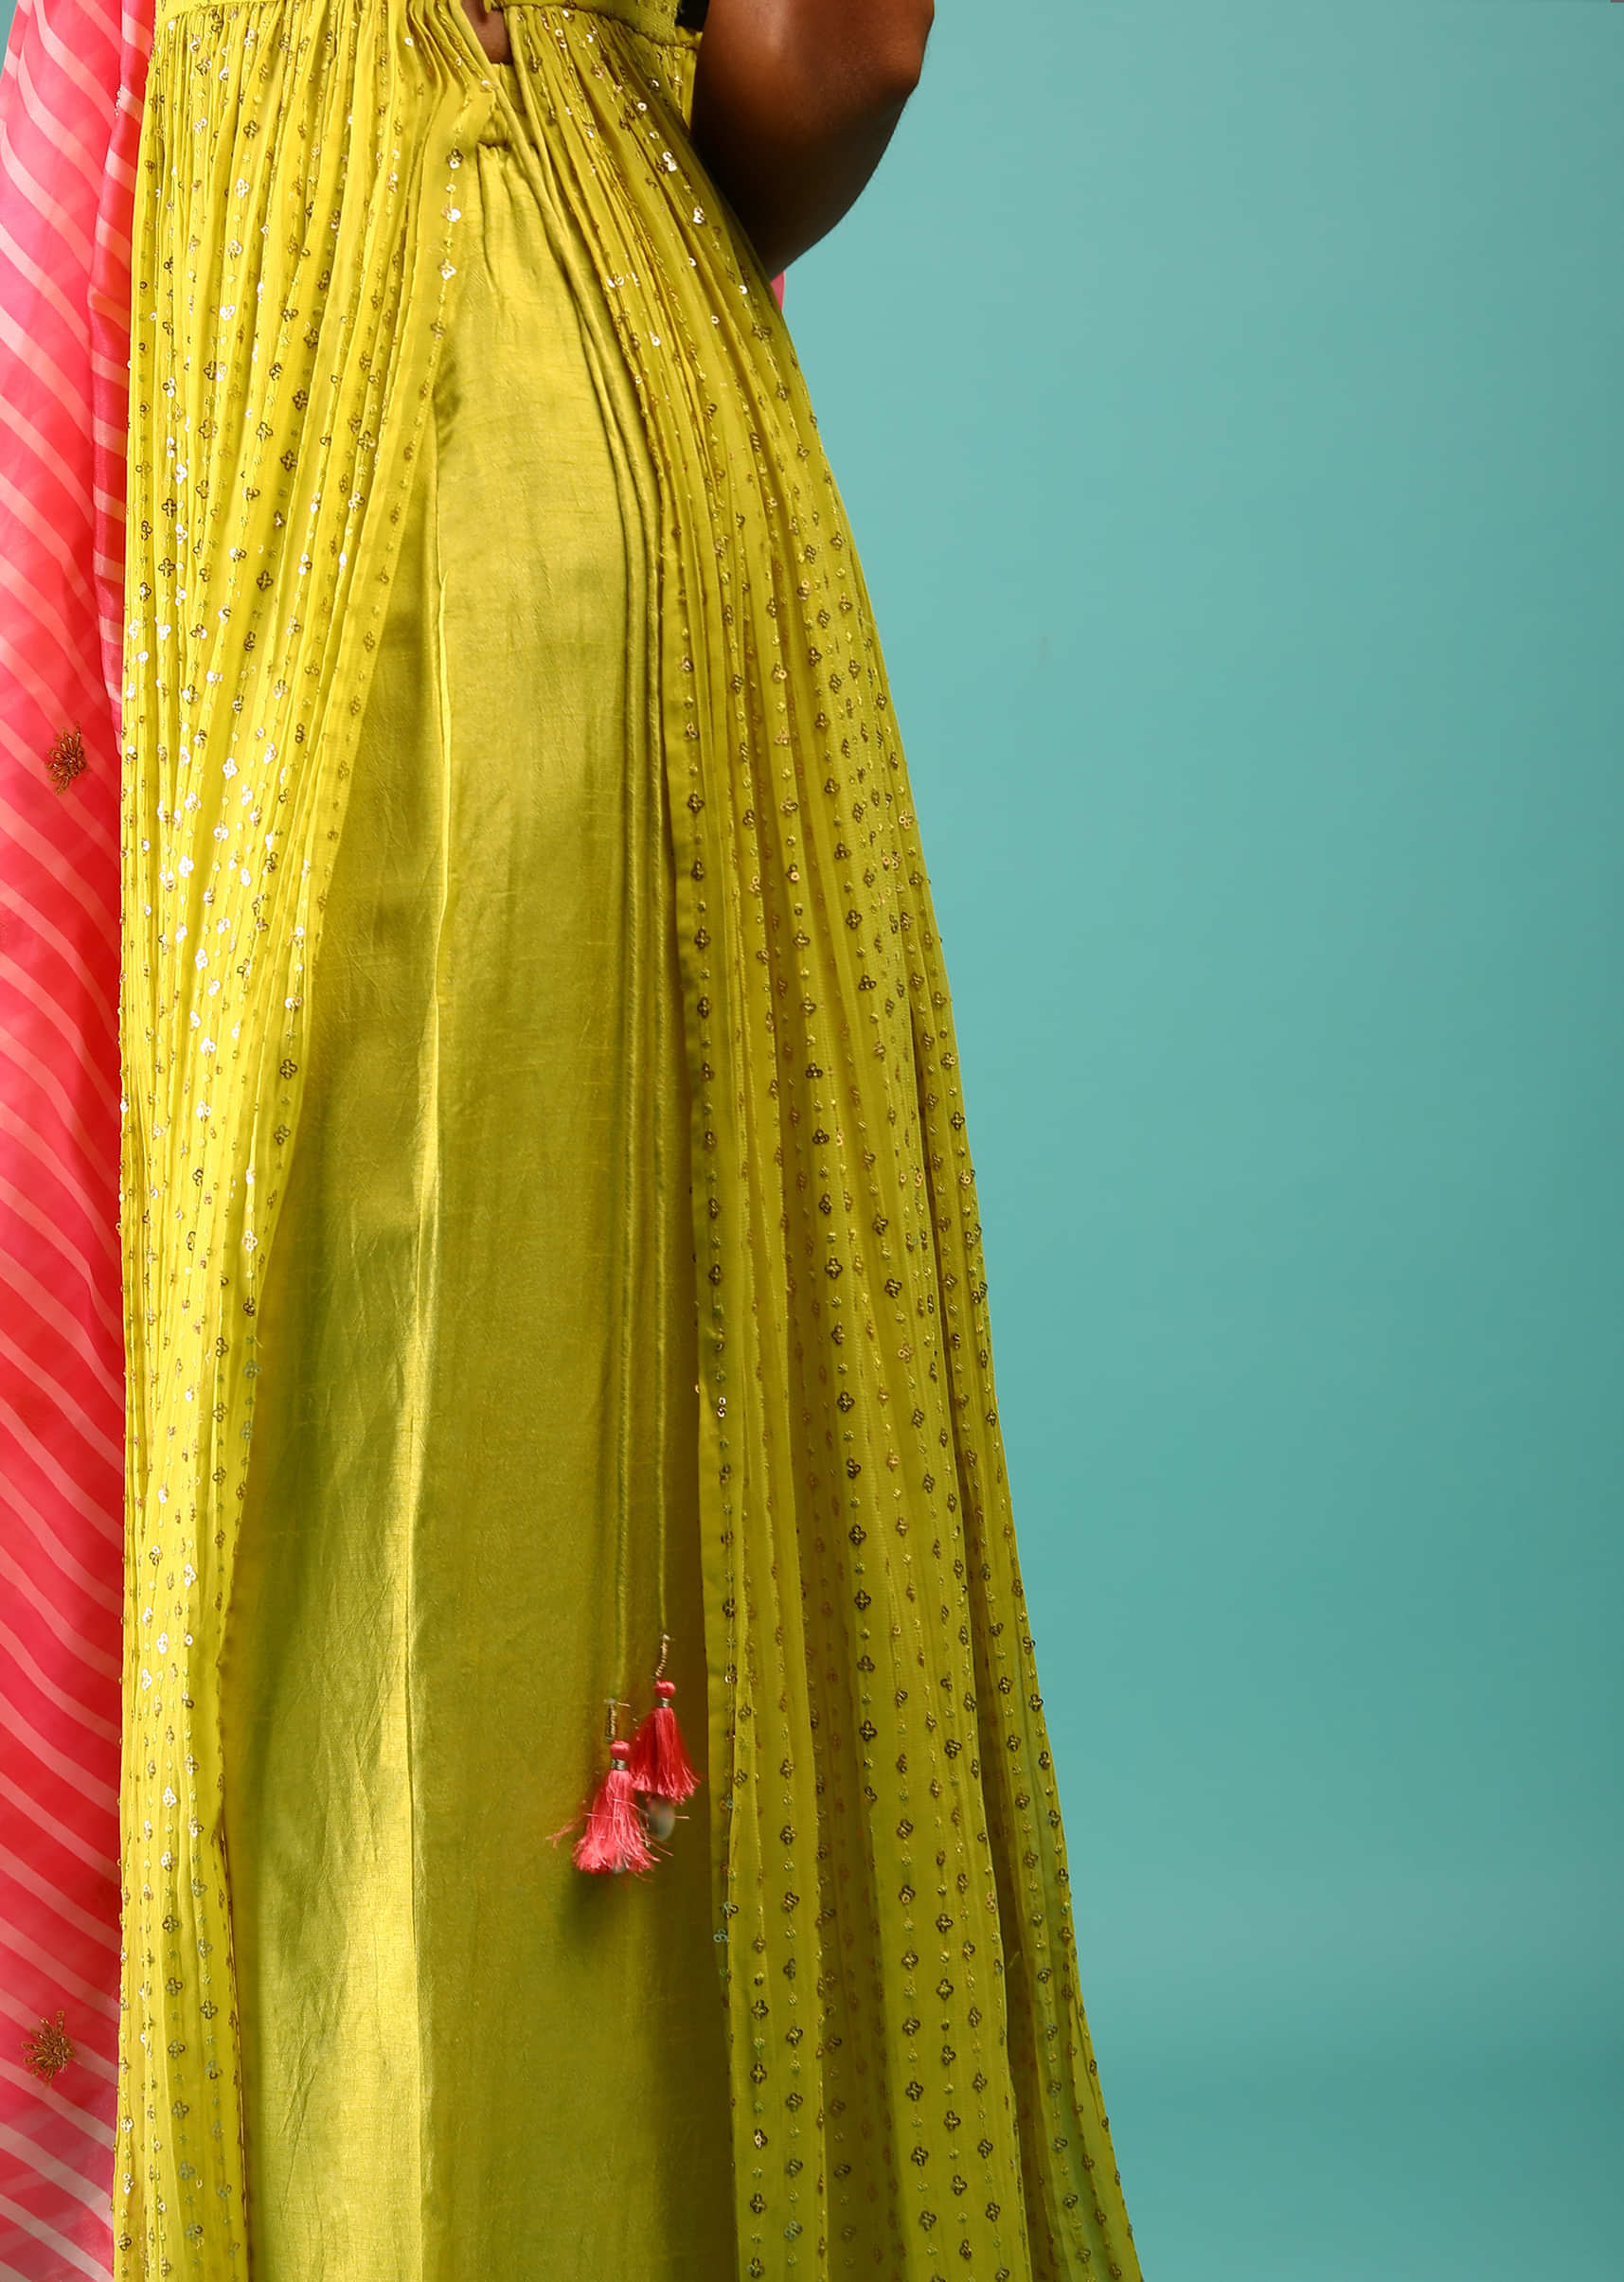 Lime Yellow Palazzo Suit With Sequins Embroidery And Fuchsia Lehariya Dupatta